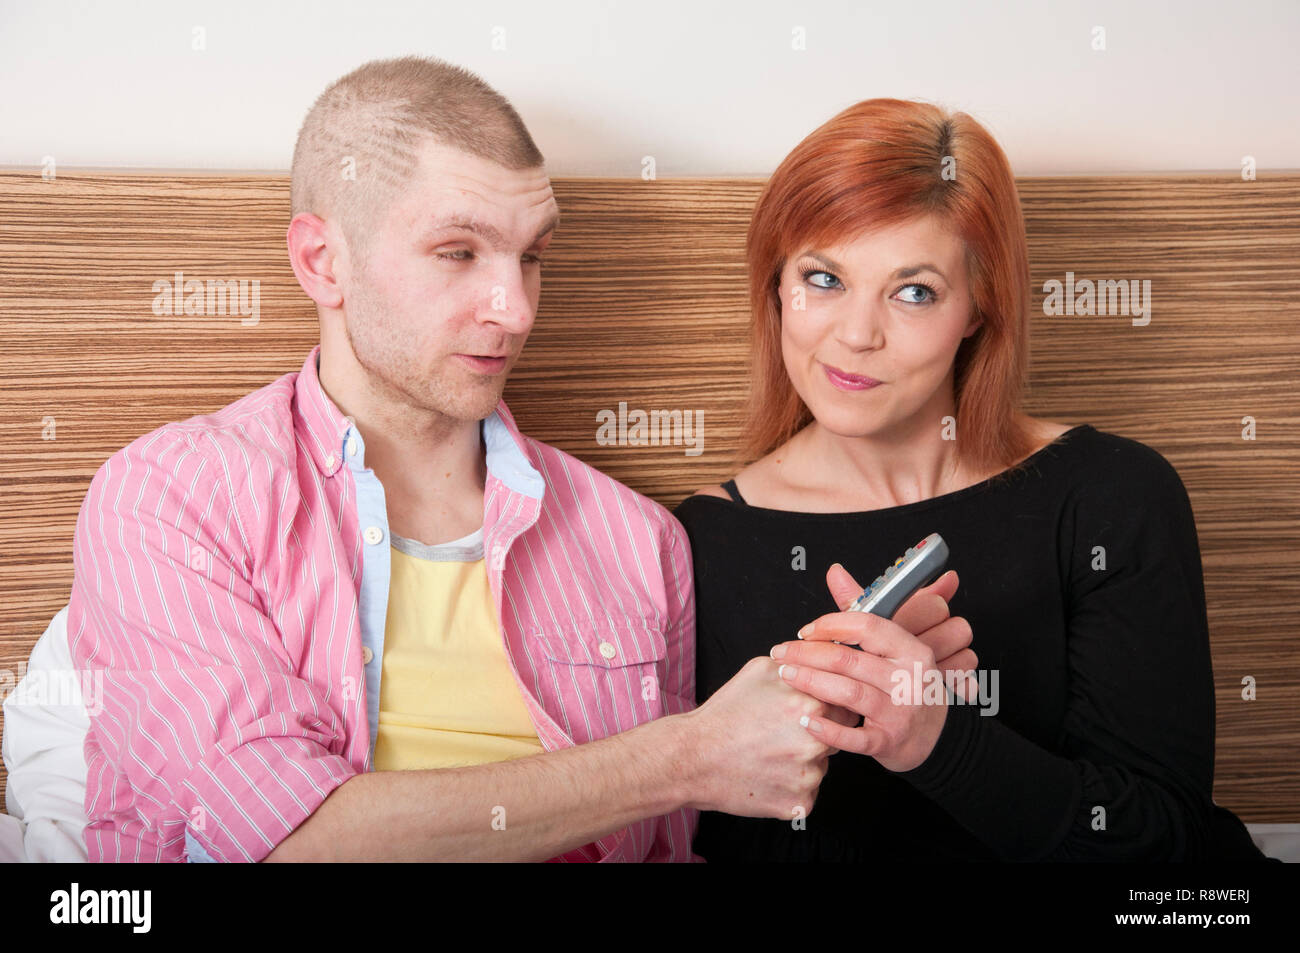 Young couple arguing fighting over TV remote control. Stock Photo